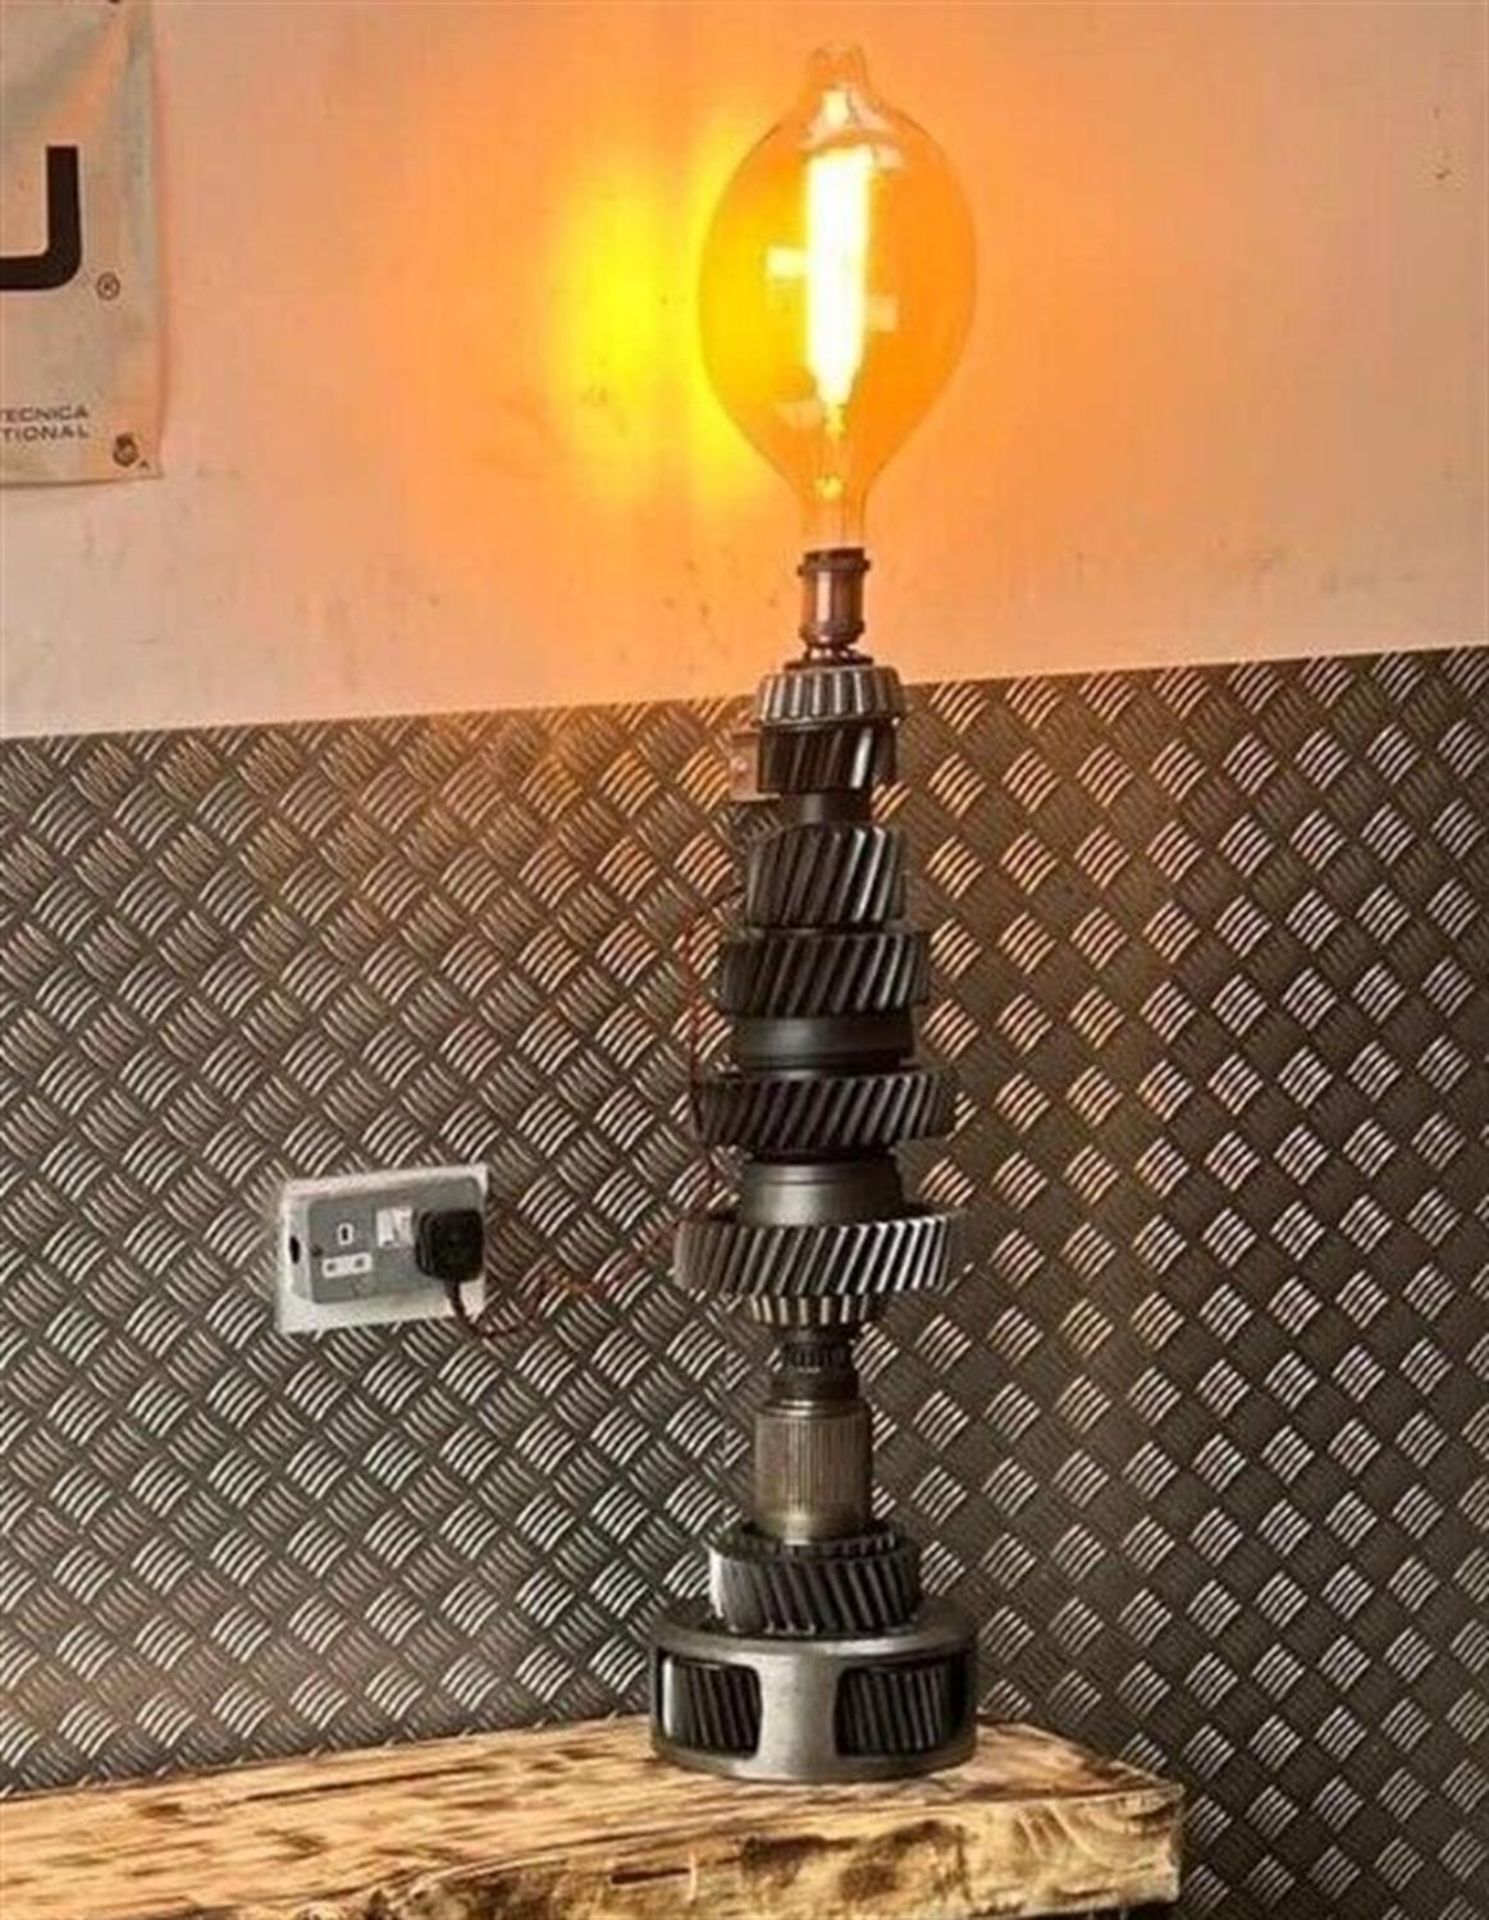 Upcycled Industrial Lamp - Image 2 of 3